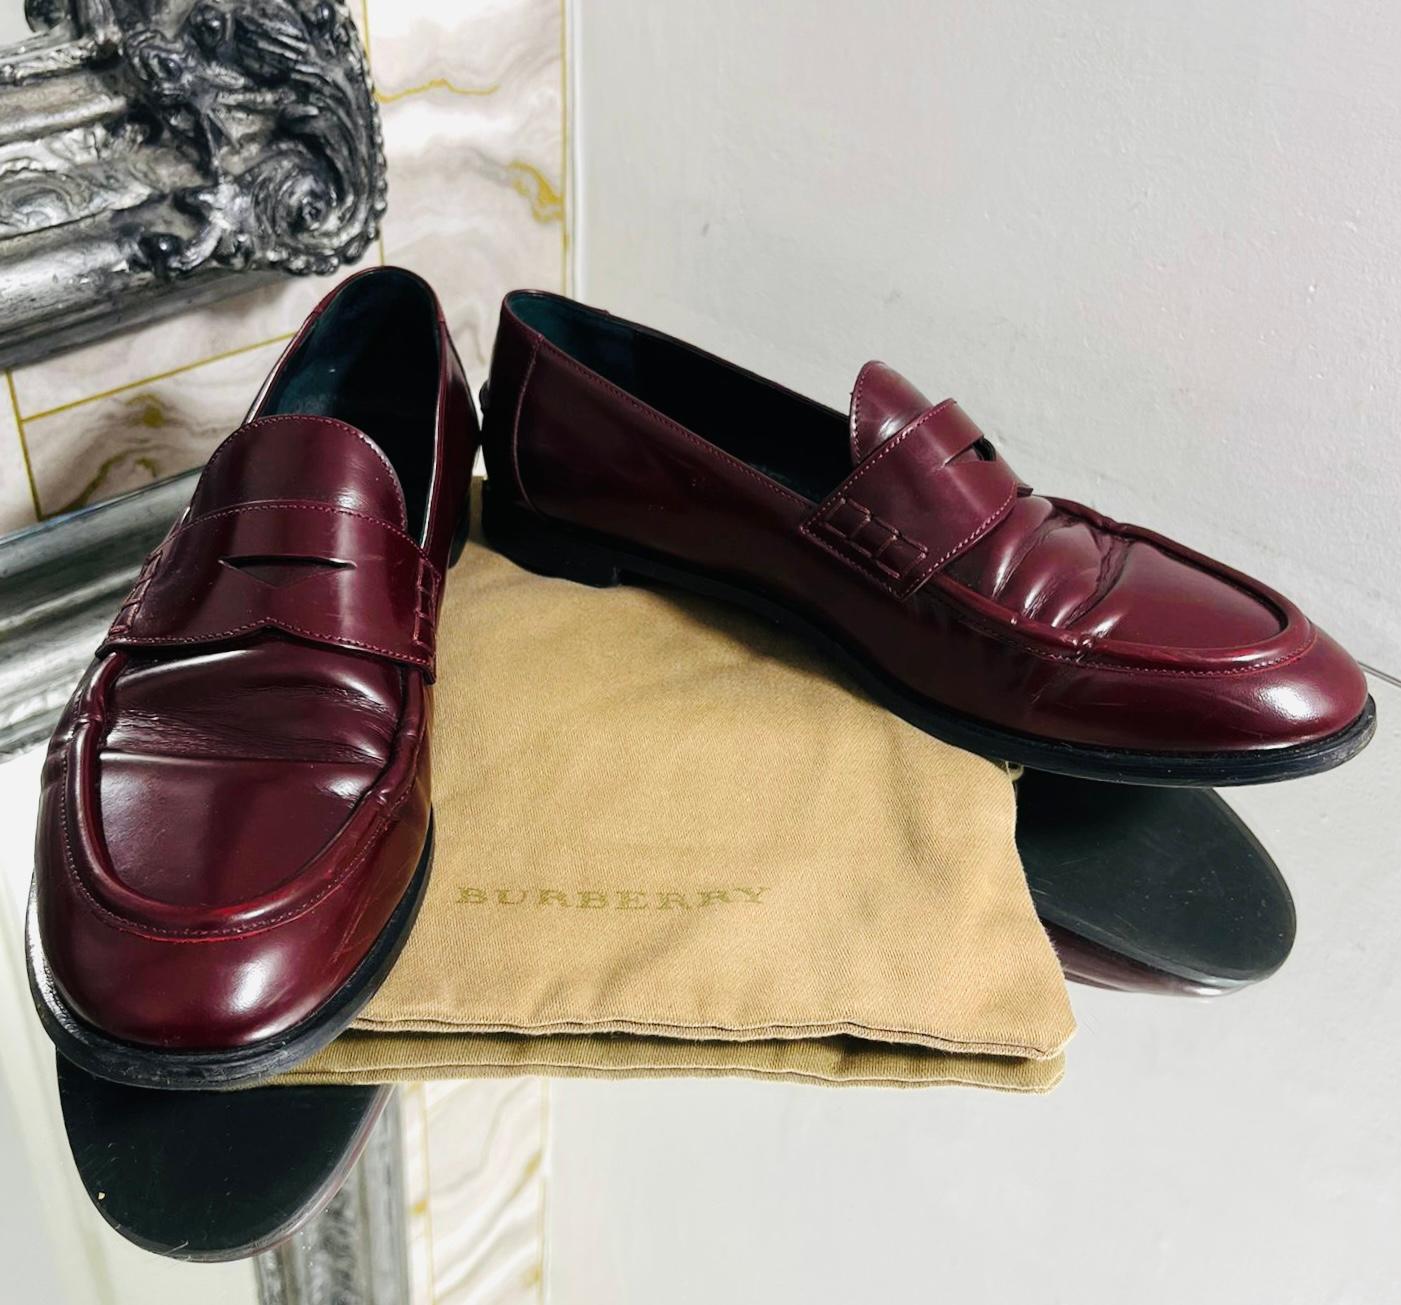 Burberry Leather Loafers

Burgundy, slip-on loafers designed with almond toe.

Detailed with gold 'Burberry' engraved plaque to the heel and tonal stitching.

Featuring leather soles, insoles, and lining.

Size – 38

Condition – Good (Light